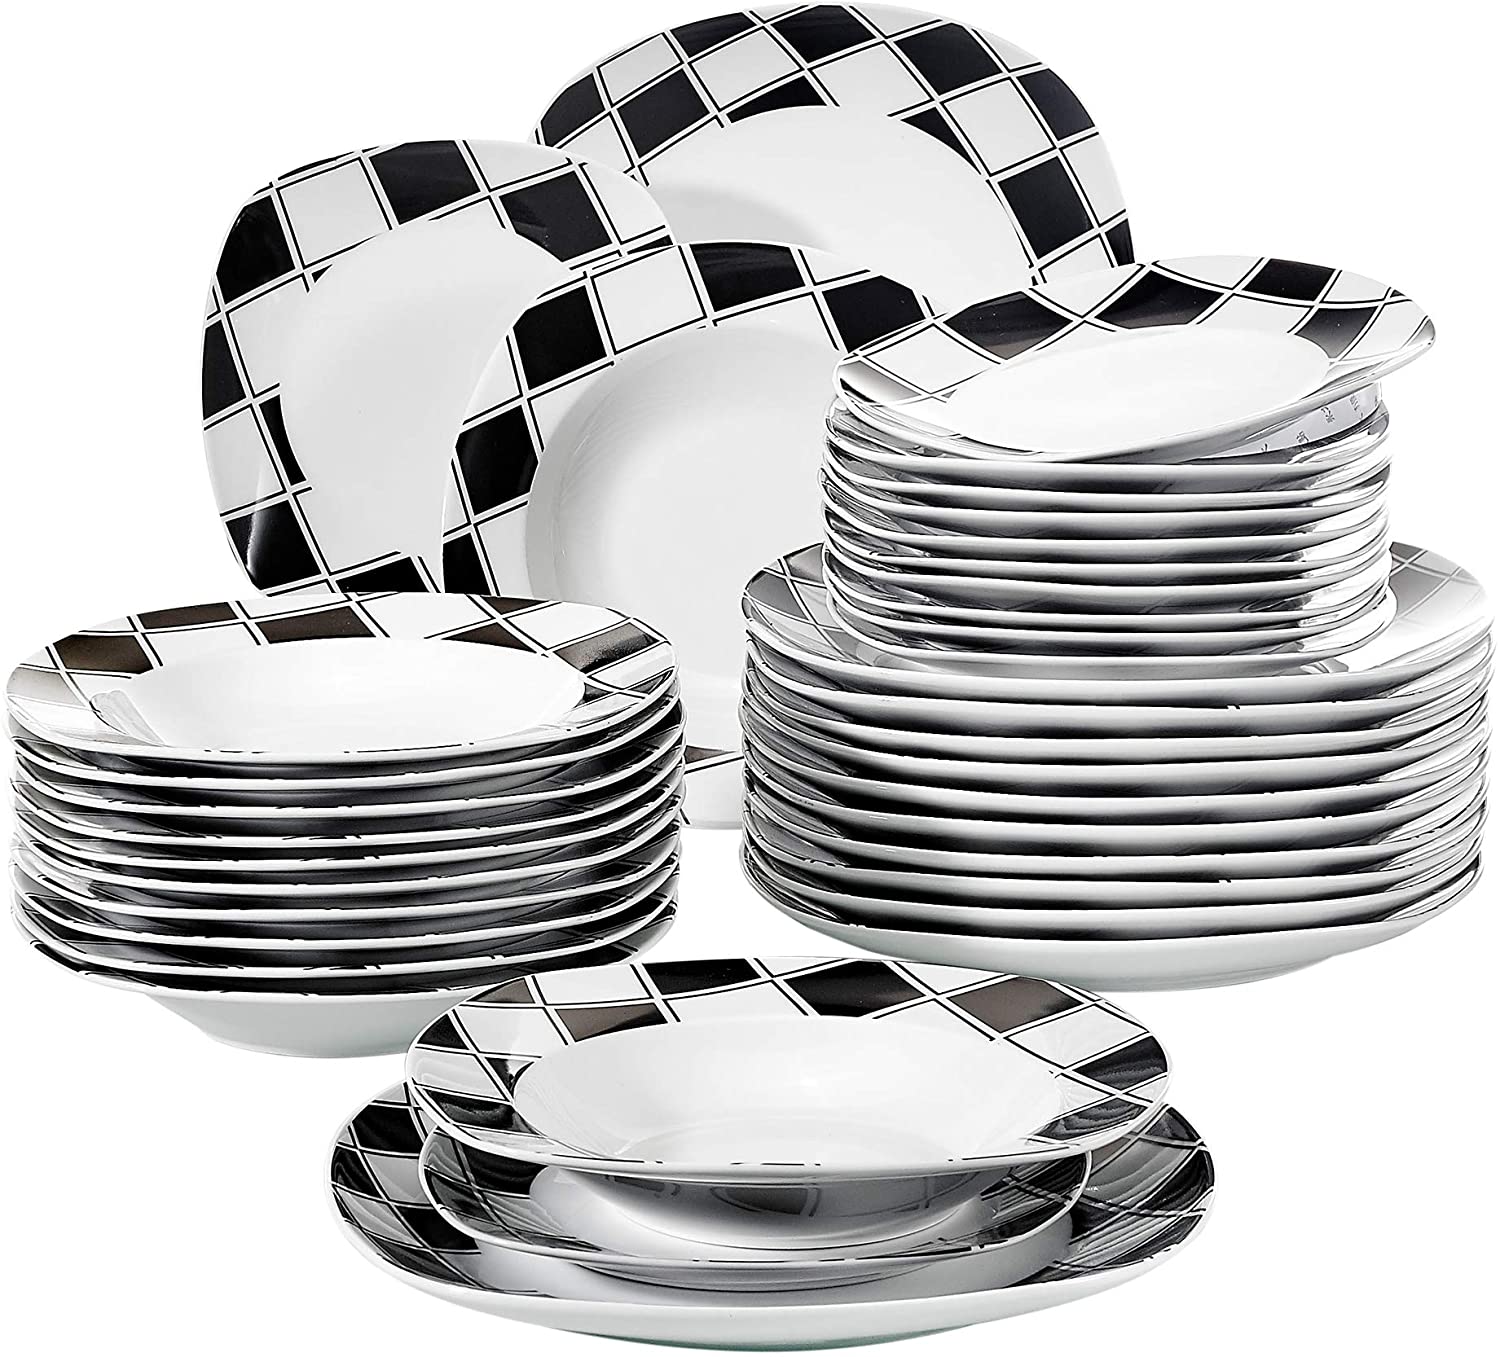 VEWEET Nicole Dinner Service 36 Pieces Porcelain Plate Set for 12 People with 12 Dessert Plates, Deep Plates and Flat Plates